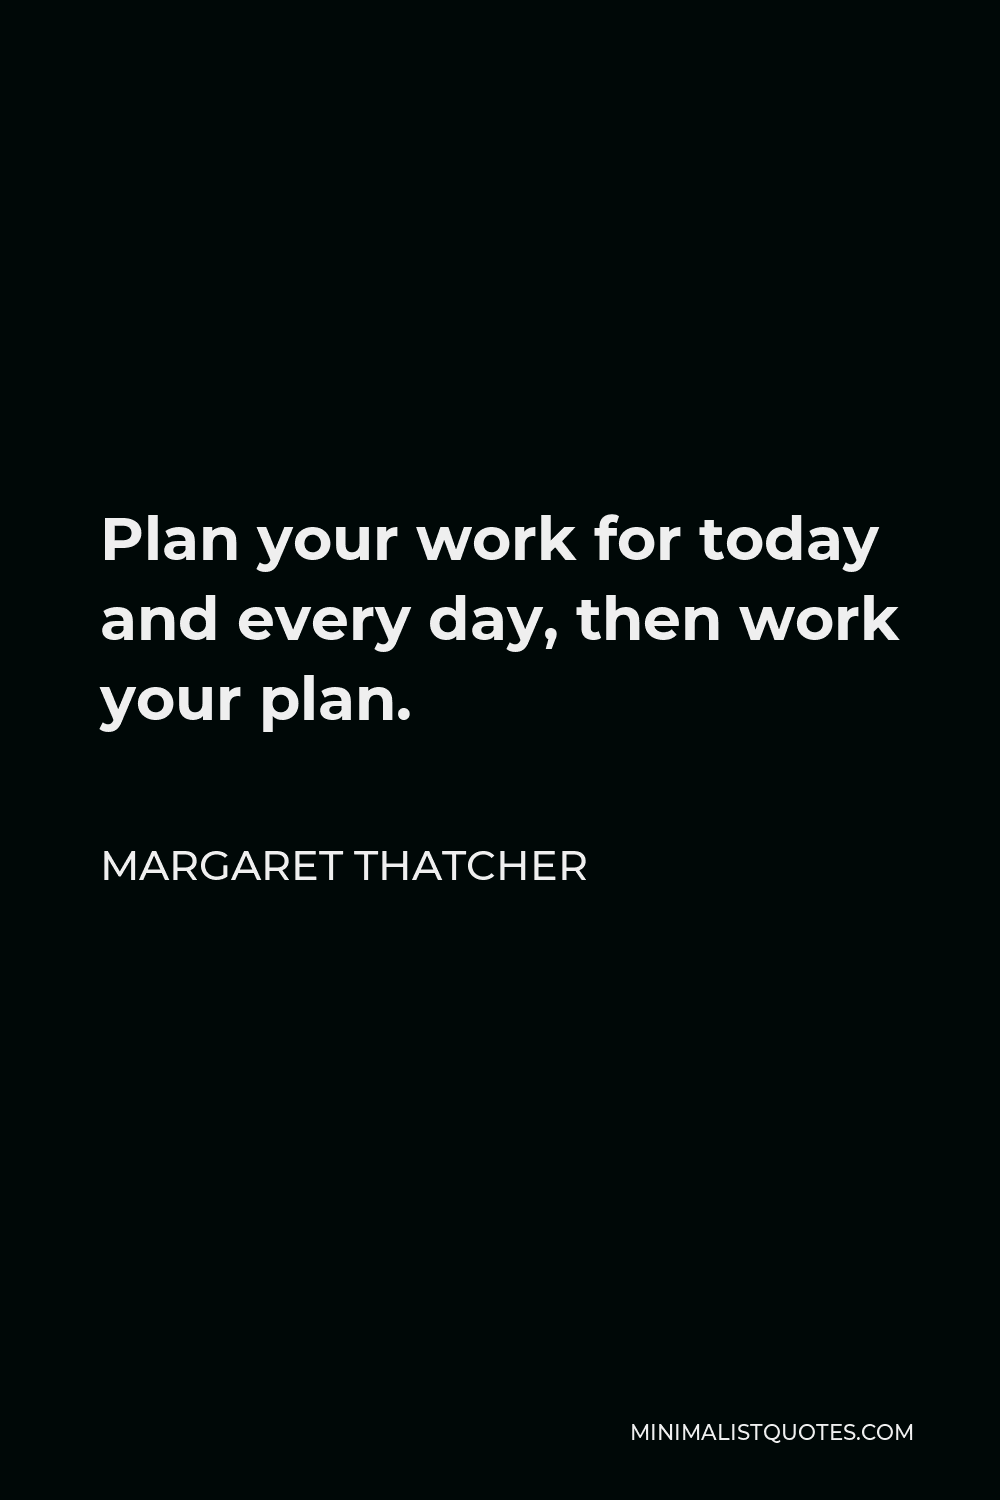 Margaret Thatcher Quote: Plan your work for today and every day, then ...